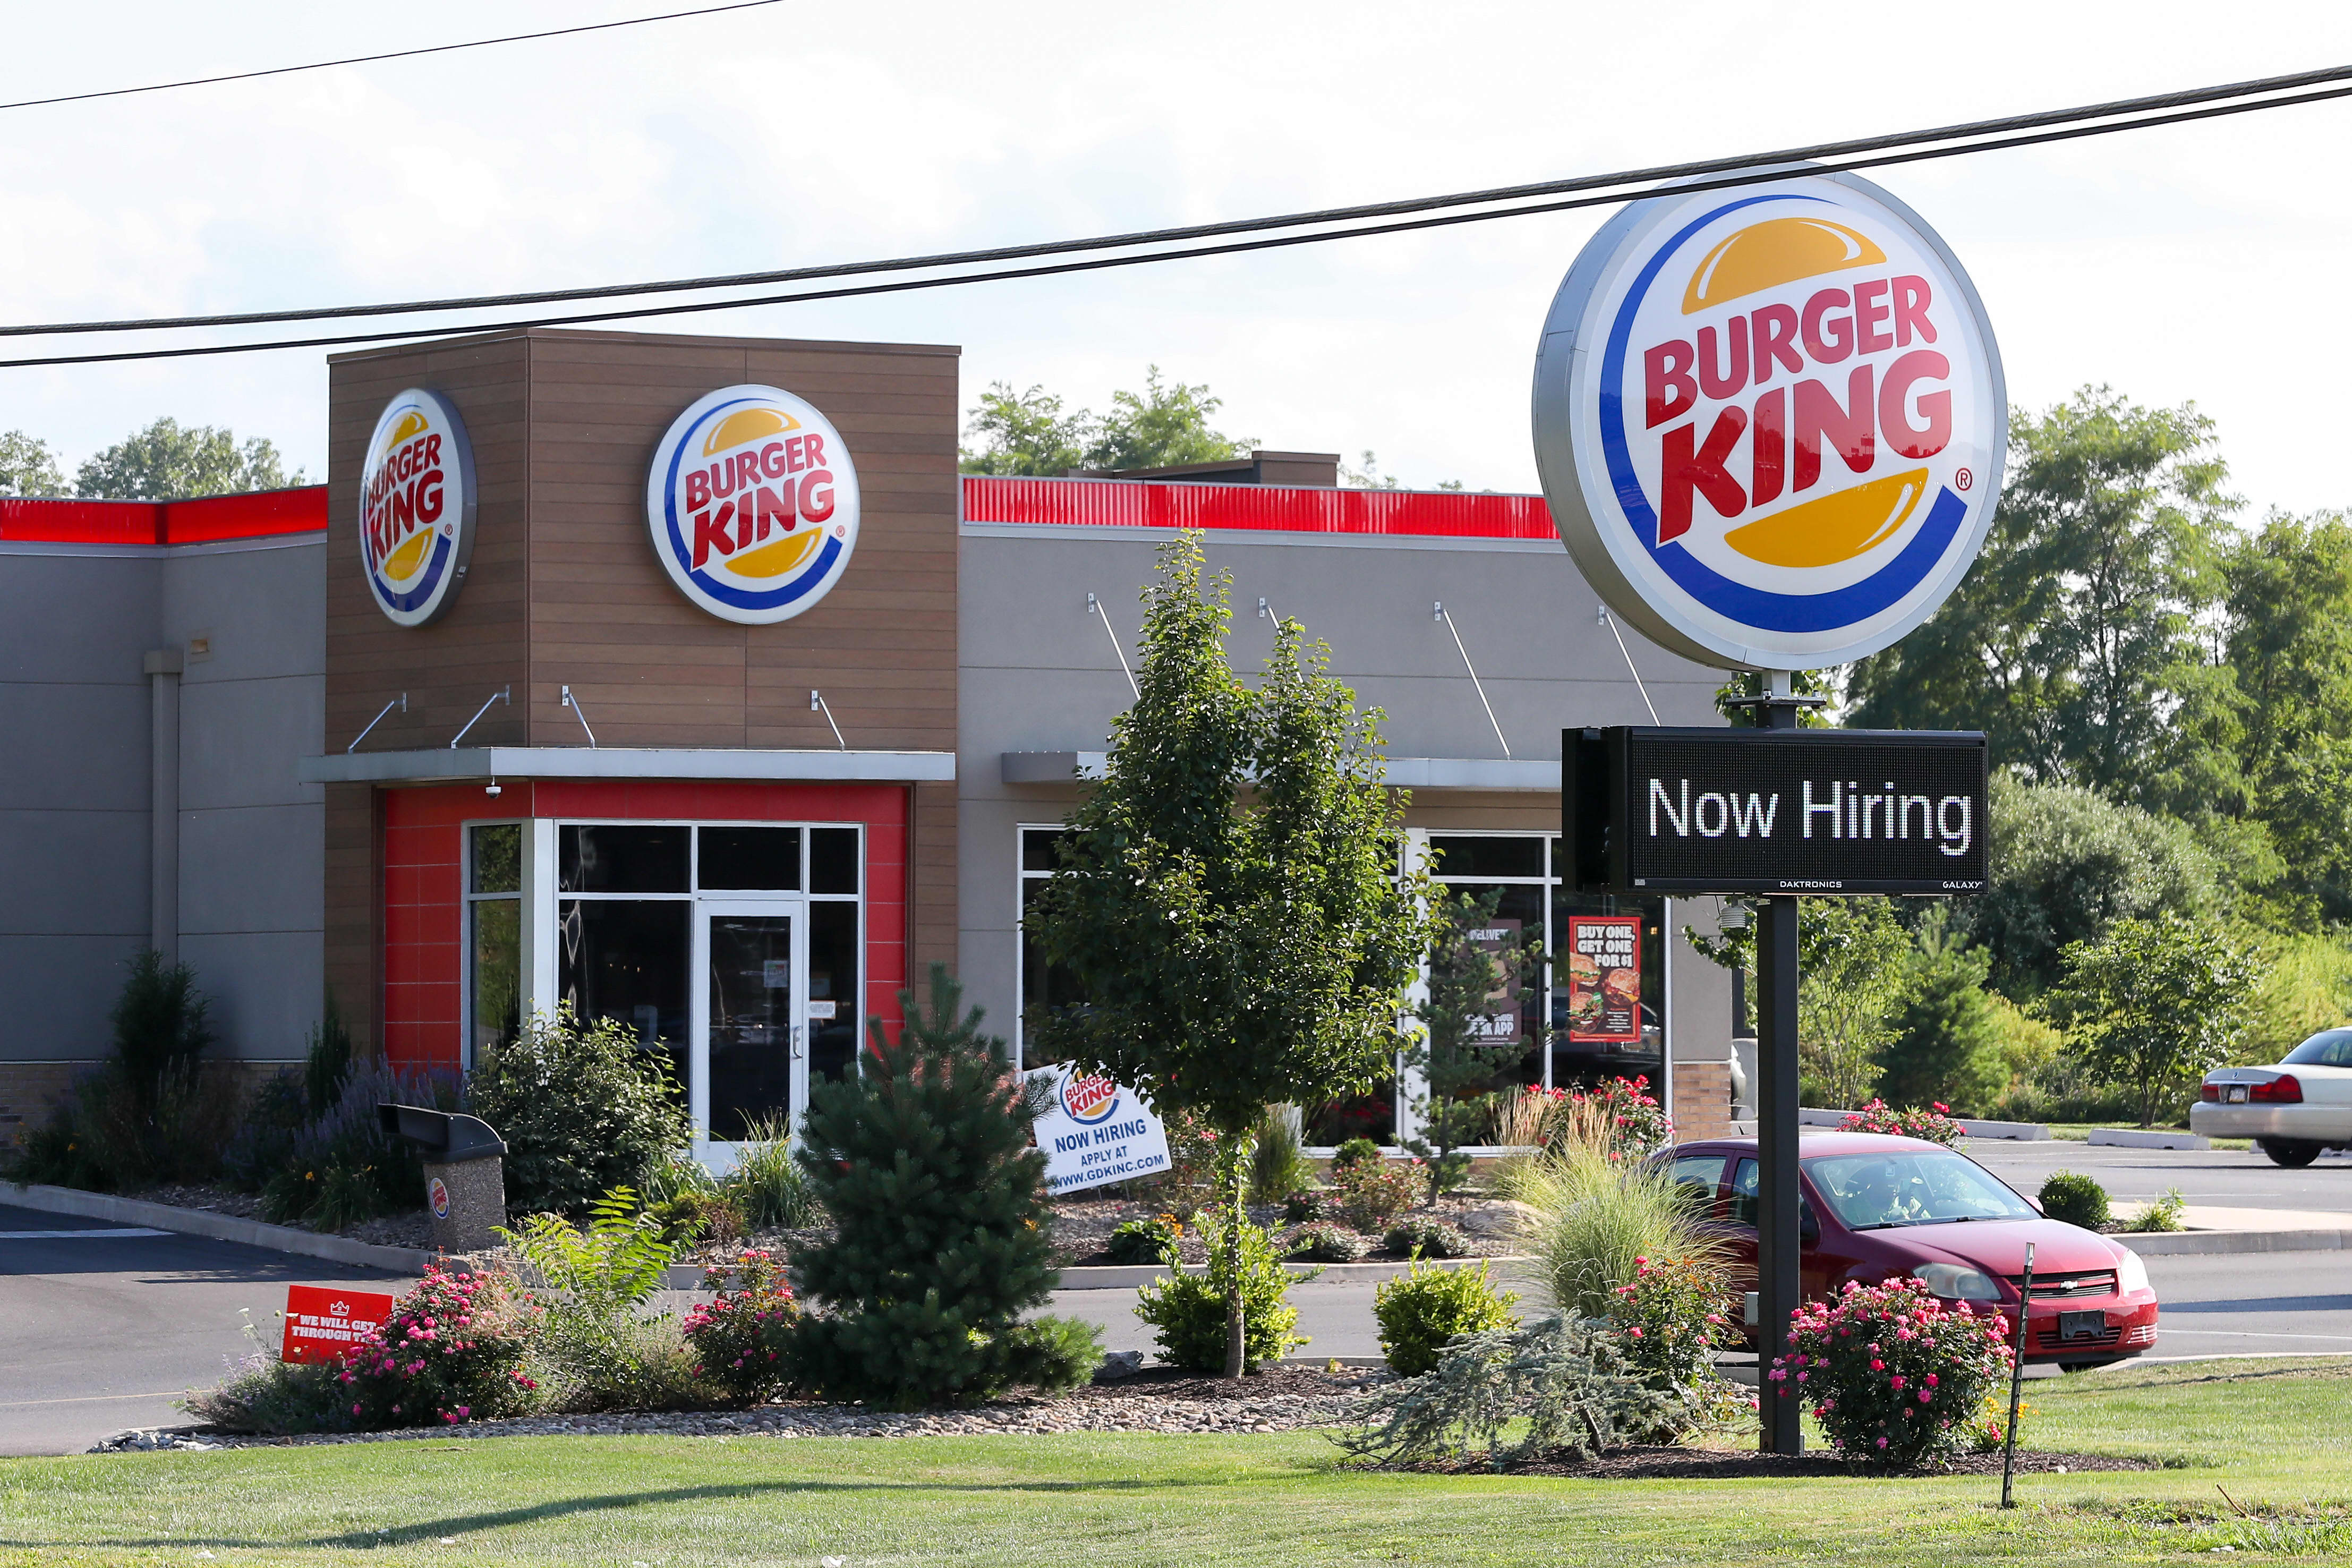 Burger King launches loyalty program nationwide as chain looks to invigorate U.S. sales